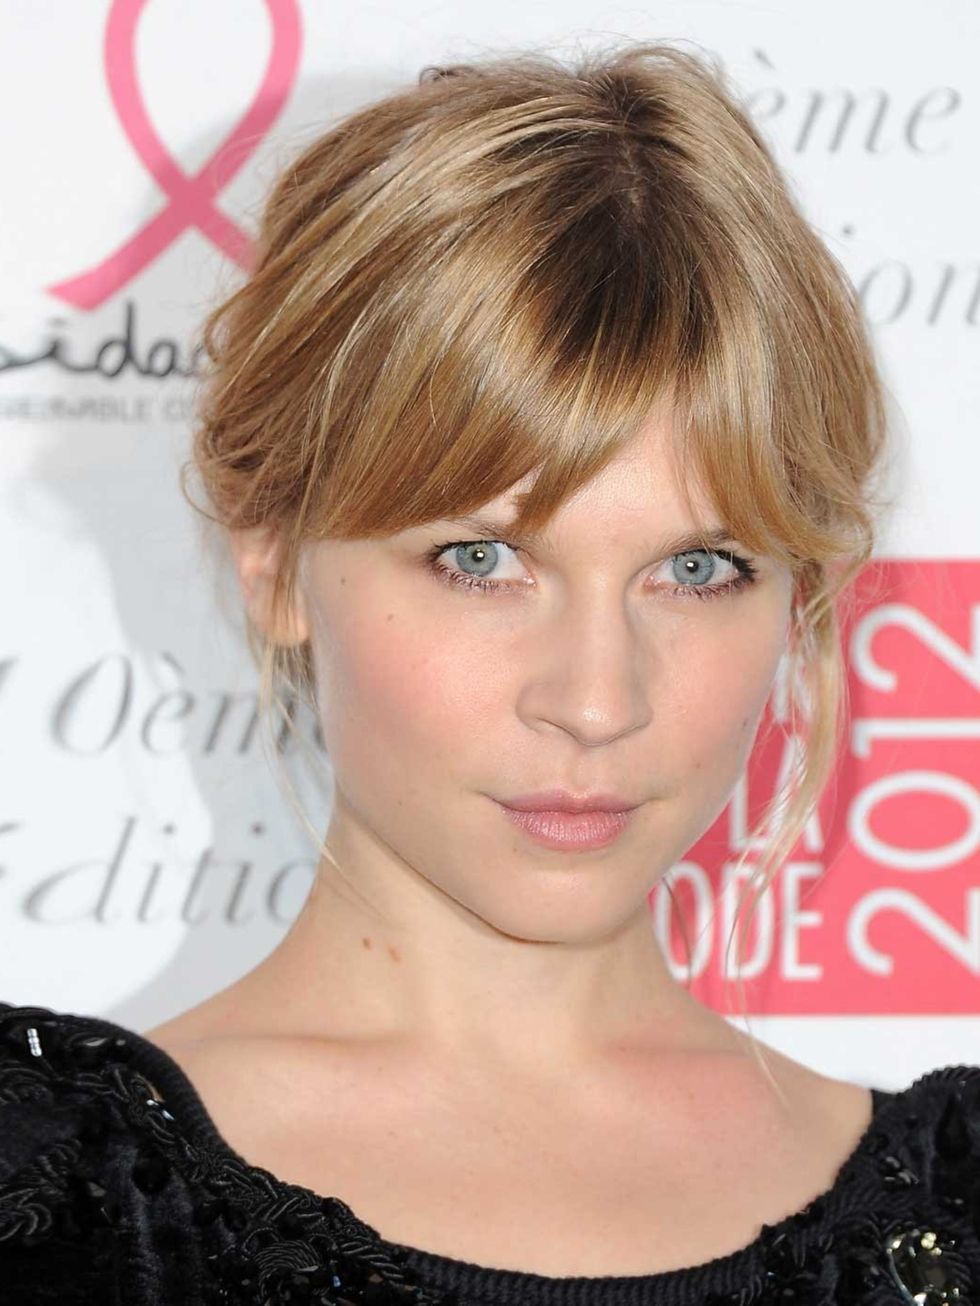 <p>The biggest hair trend this year has to be the fringe (or bangs if youre reading this Stateside). Not one, but eight stars have stepped out this year with freshly cut fringes. <a href="http://www.elleuk.com/star-style/celebrity-style-files/nicole-rich